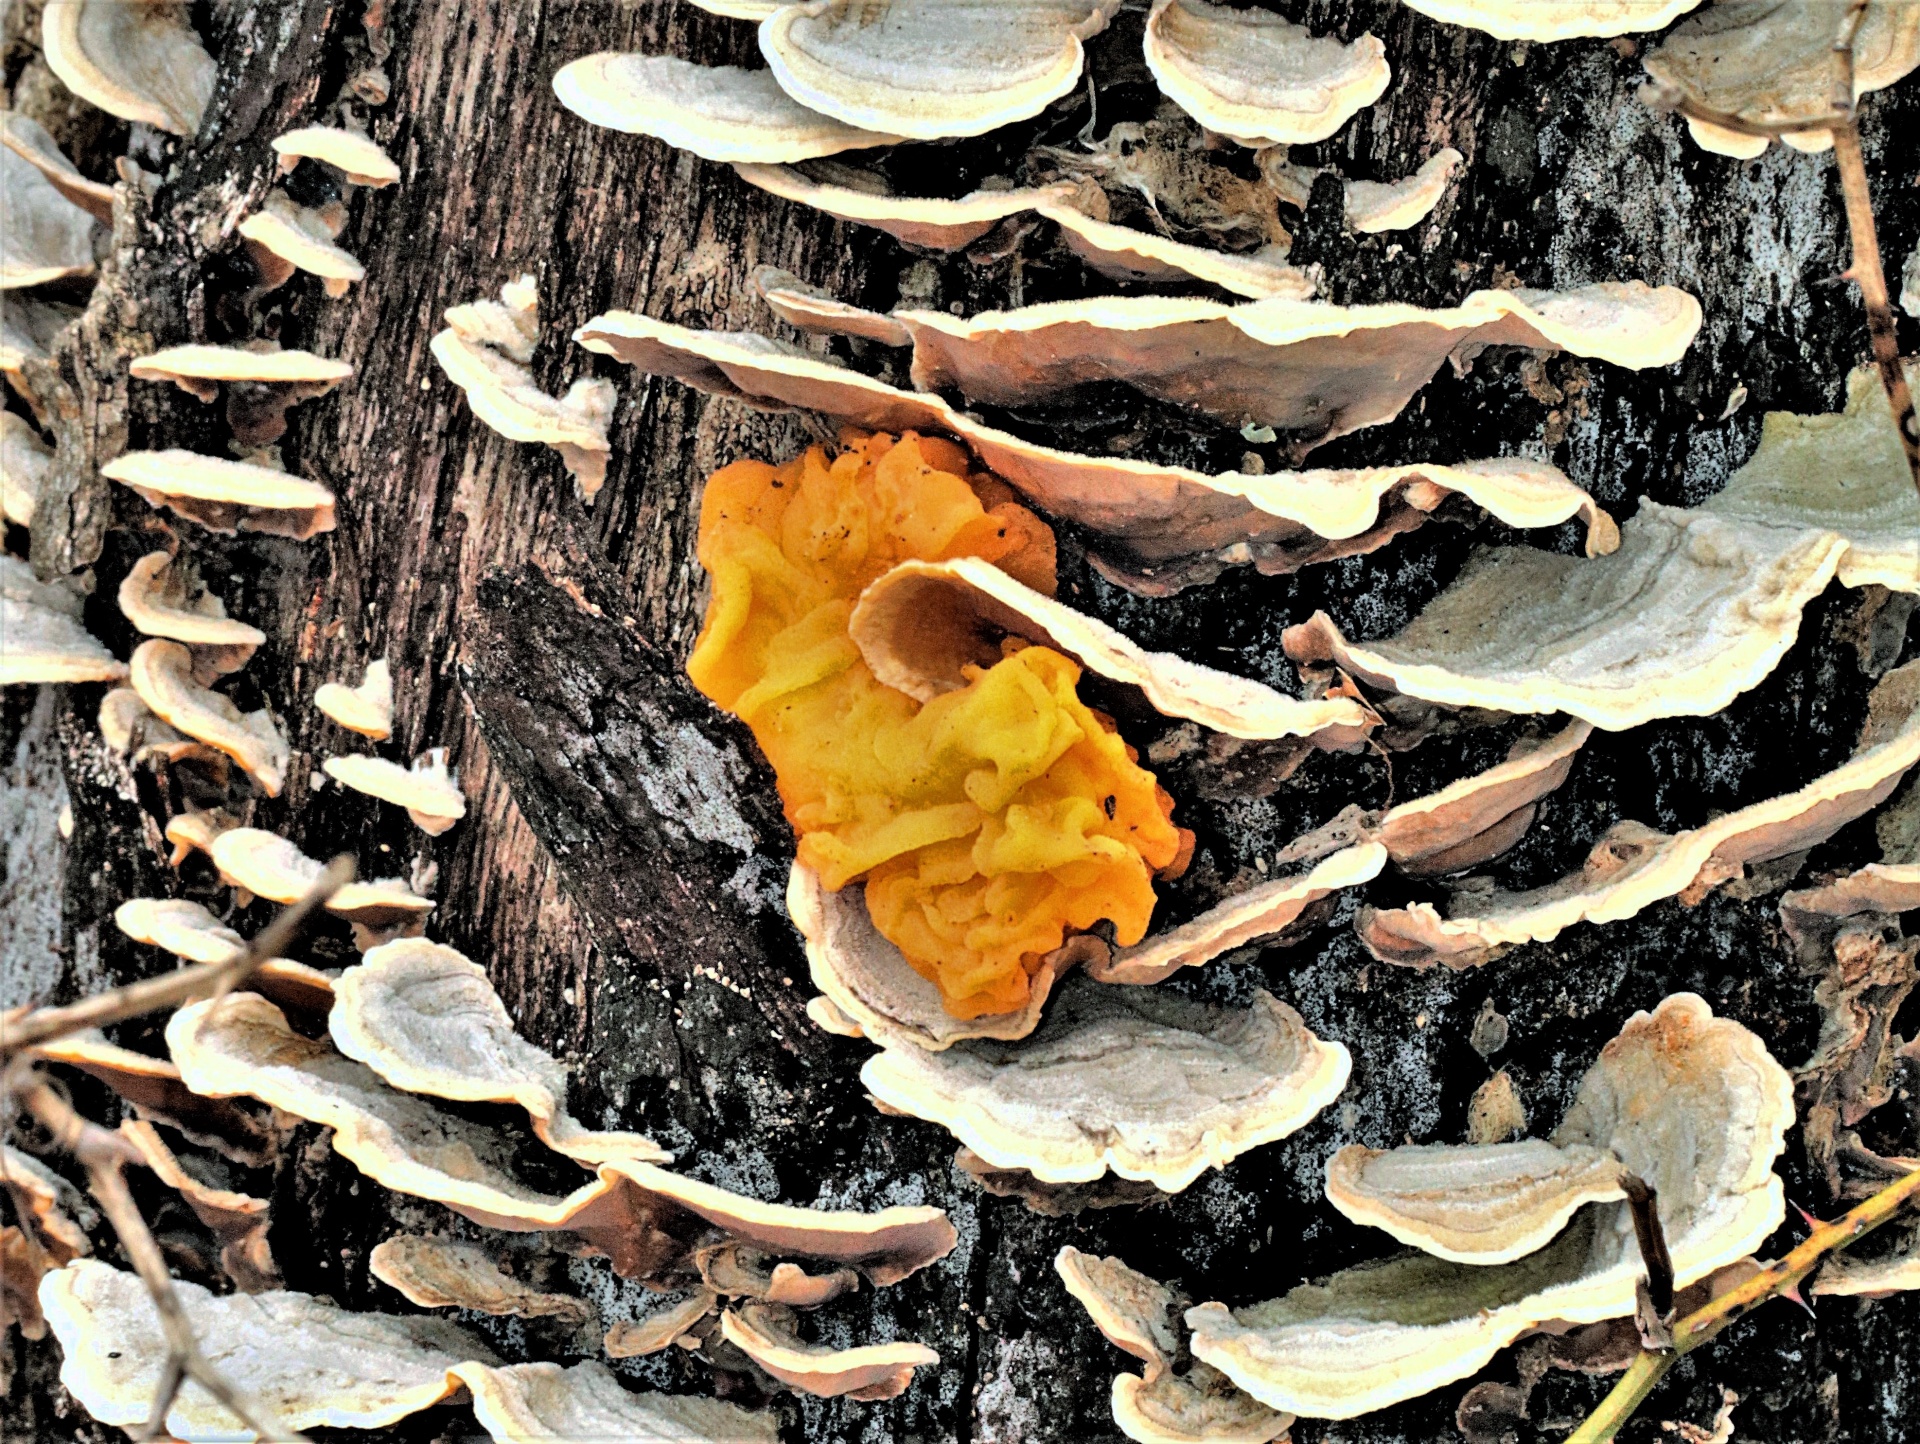 Yellow jelly fungus, also called Witch's butter, growing among white bracket fungus on the bark of a dead oak tree.